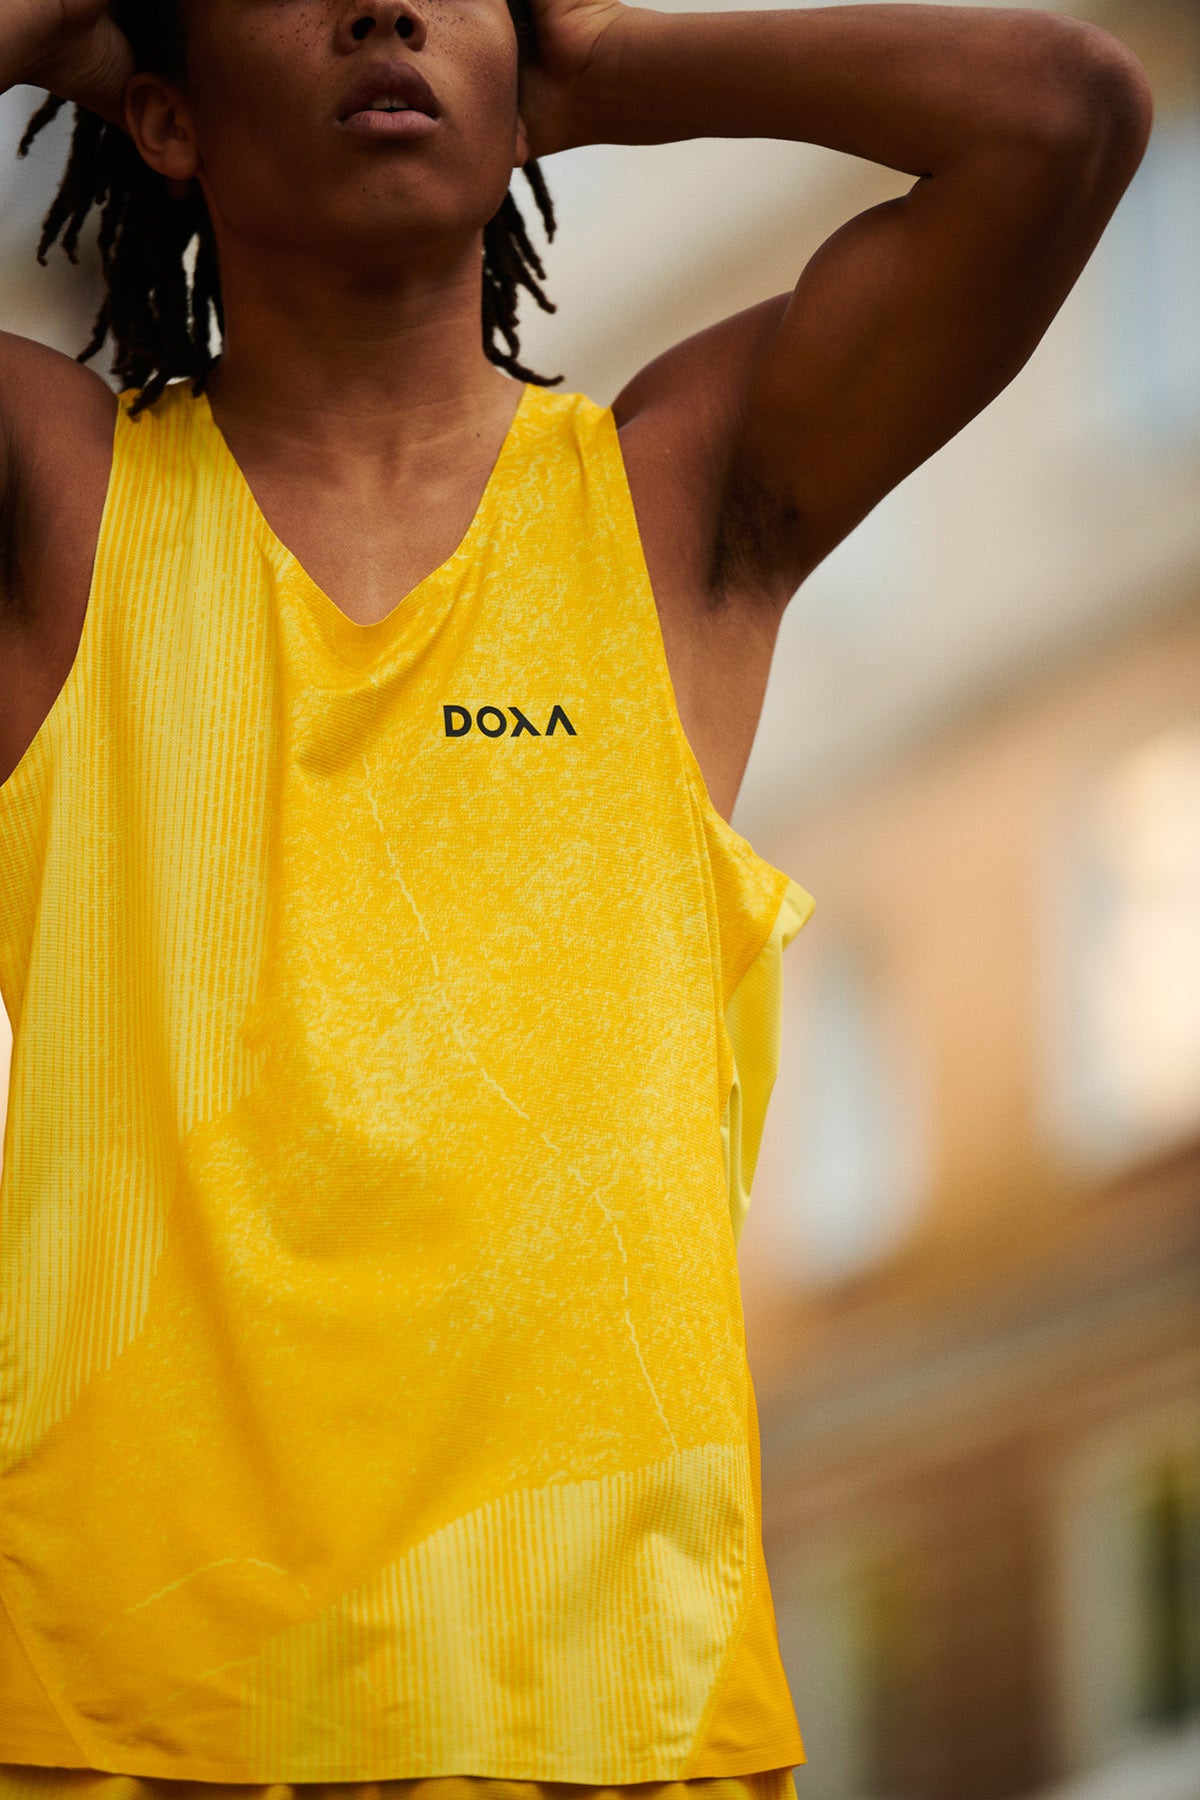 Doxa SS 16 - Injuries Make You Stronger